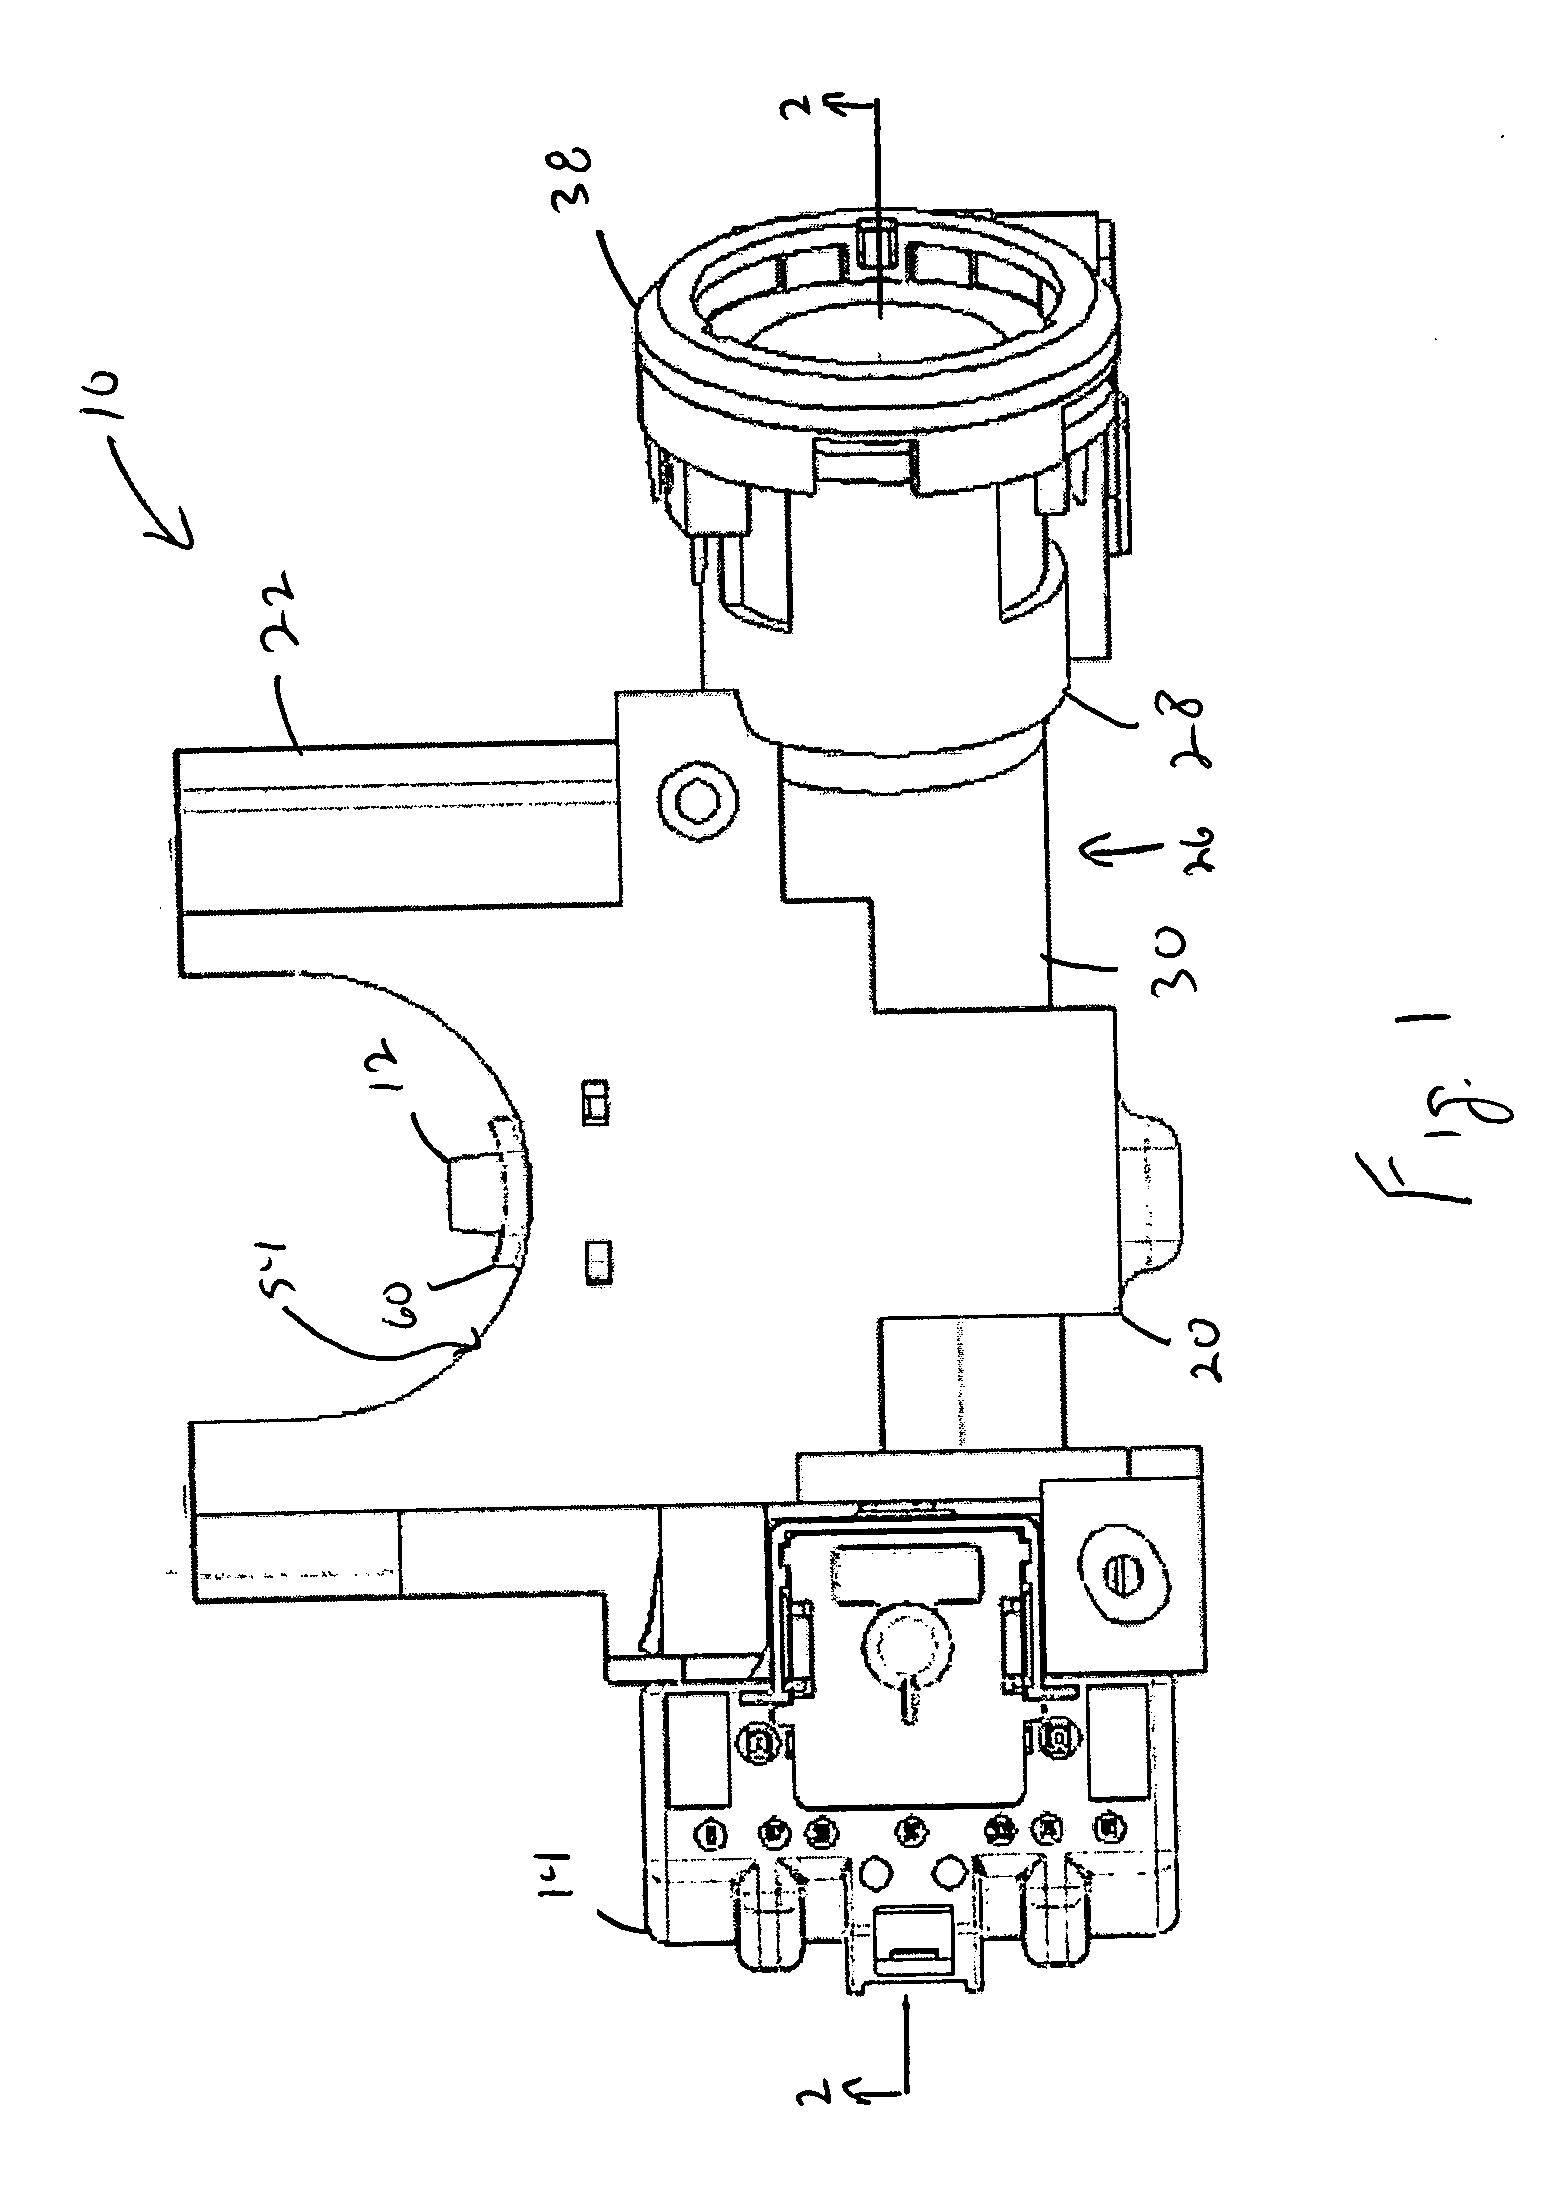 Non-linear steering lock assembly